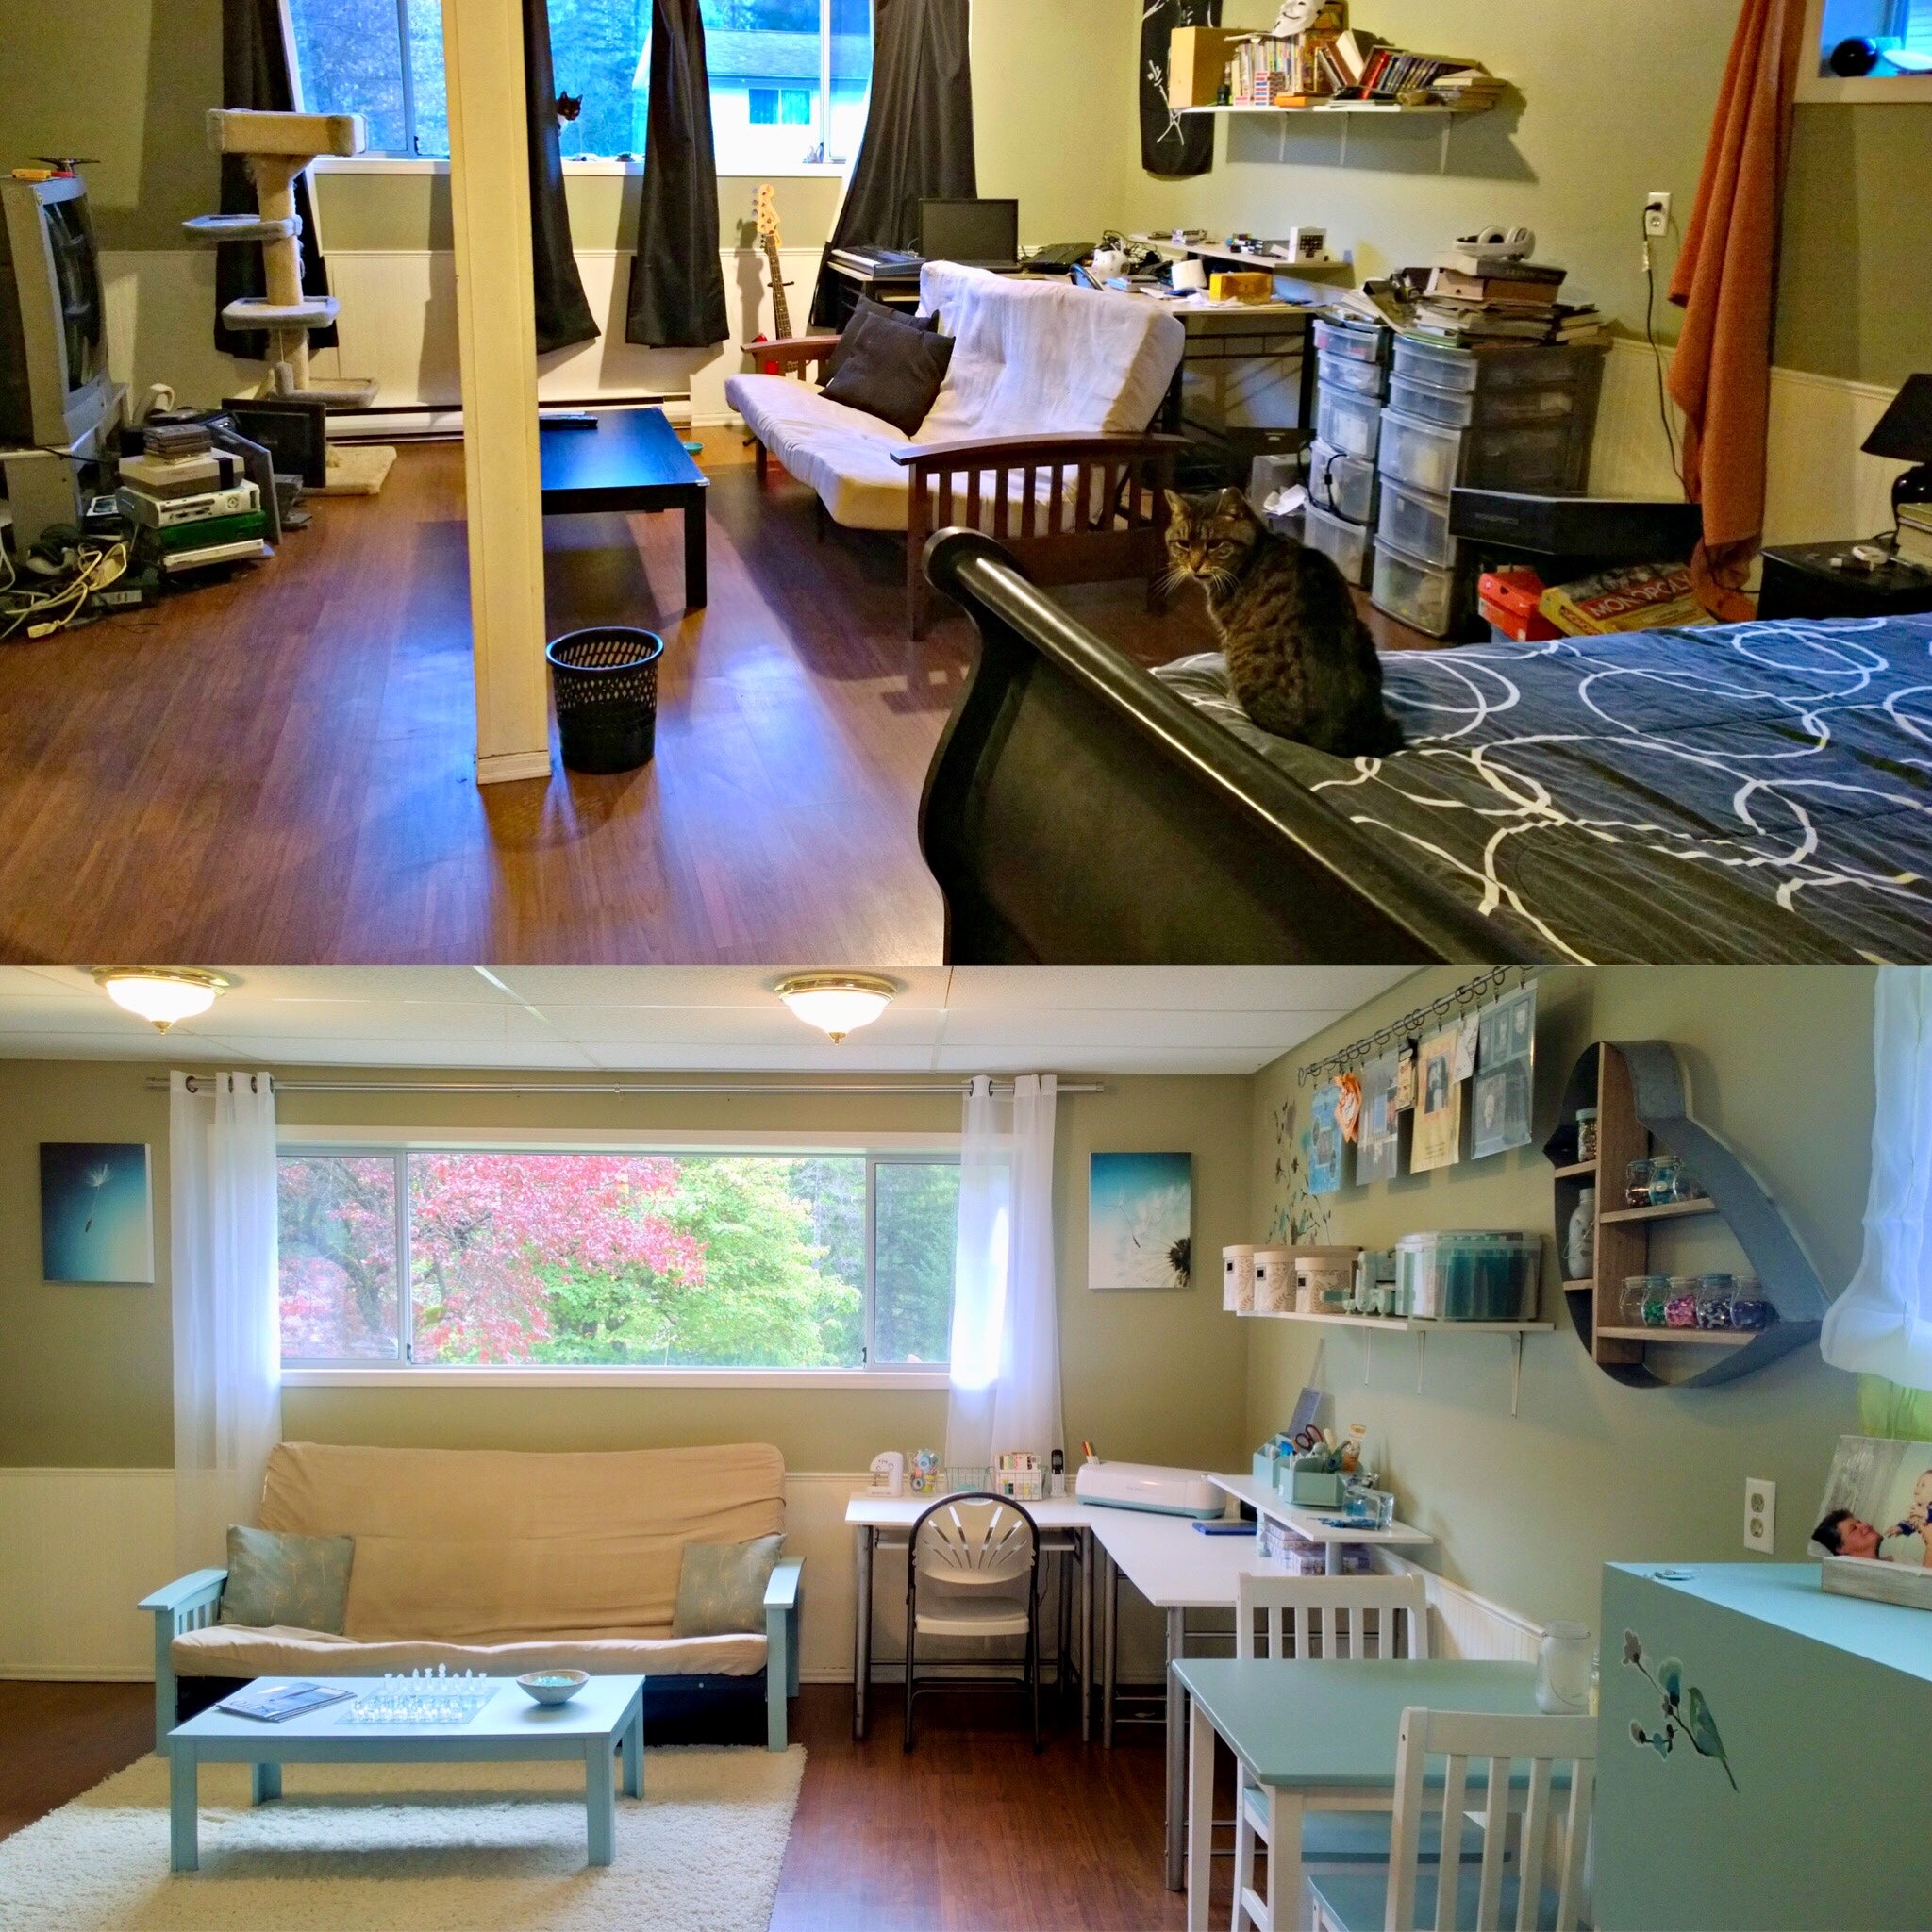 Room makeover transformation from teen bedroom to spare bedroom craft room before and after photos